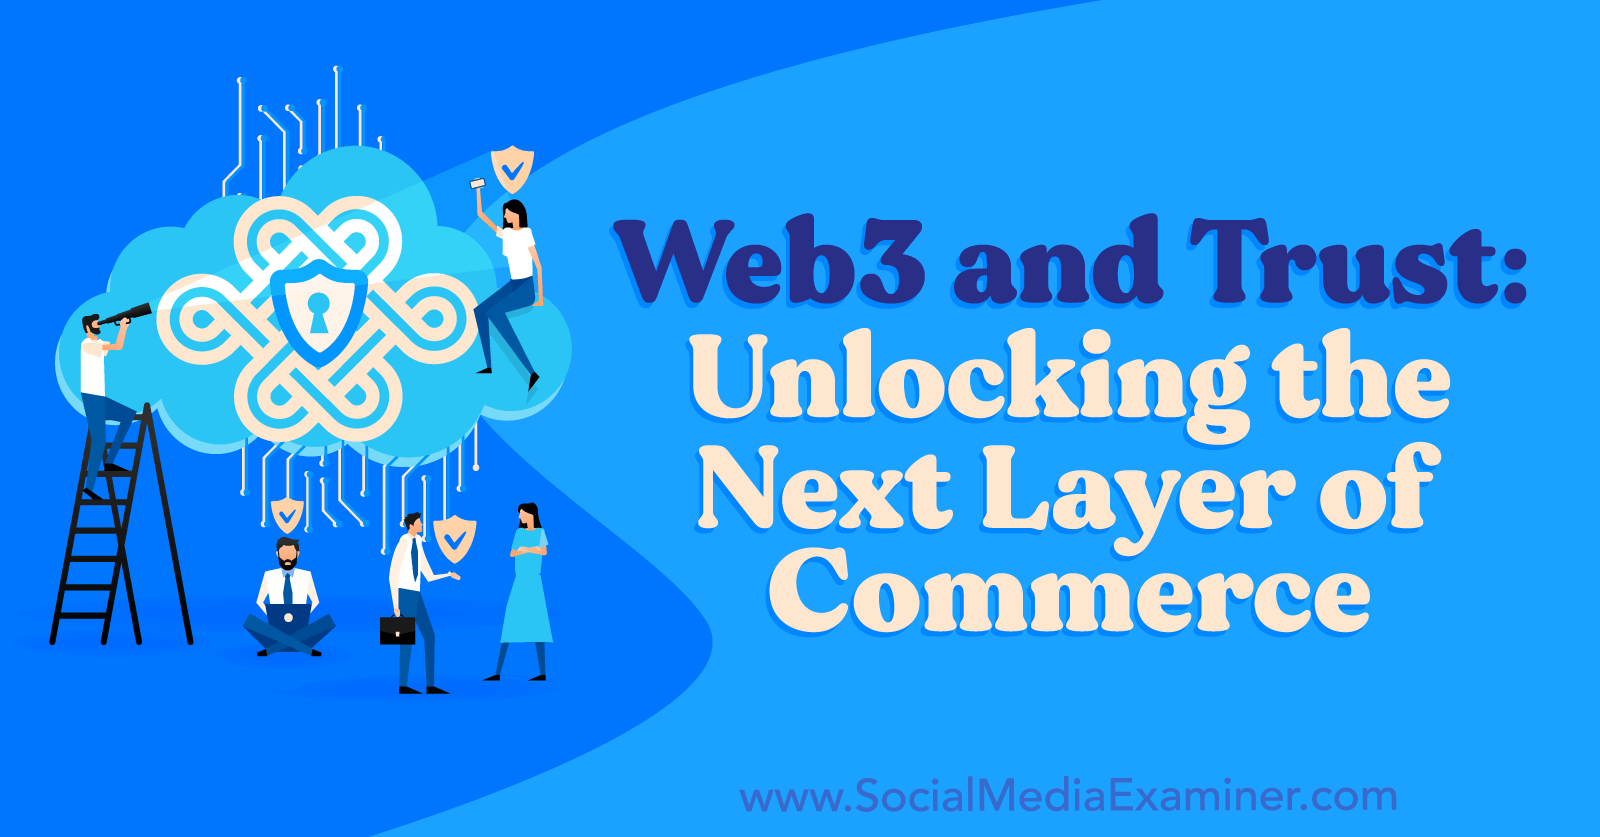 web3-and-trust-unlocking-the-next-layer-of-commerce-by-social-media-examiner